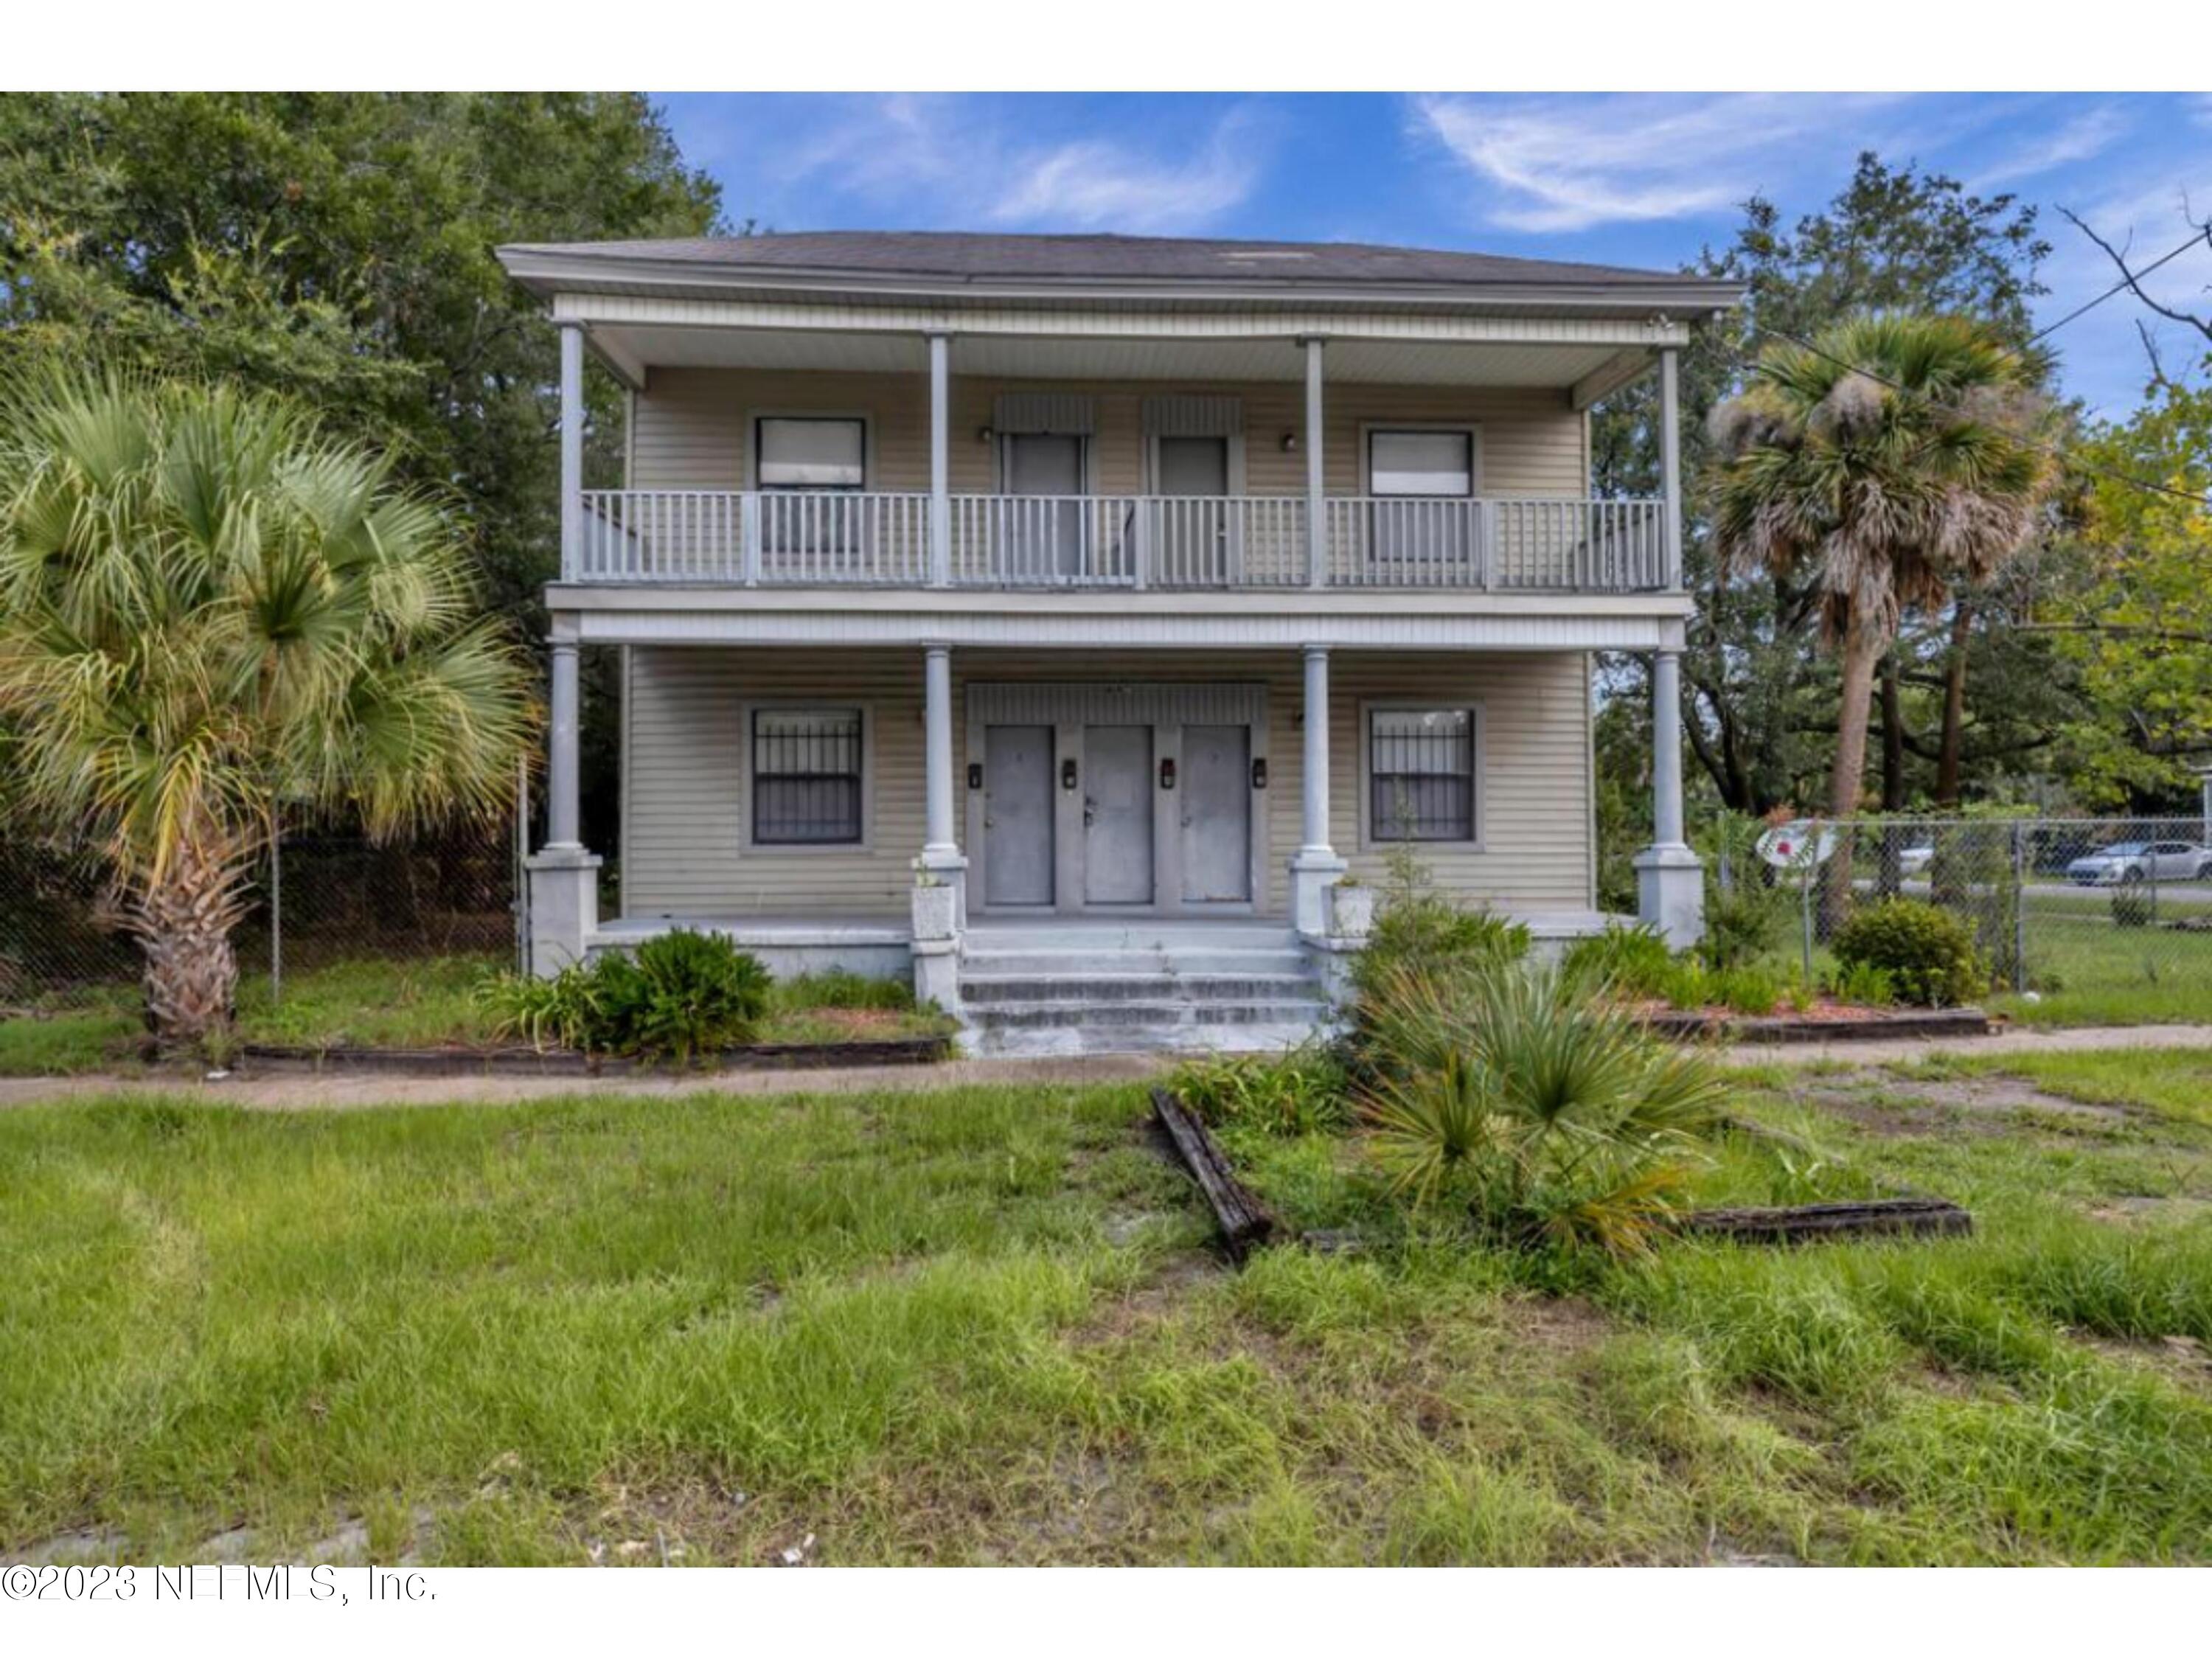 Jacksonville, FL home for sale located at 647 PIPPIN Street, Jacksonville, FL 32206